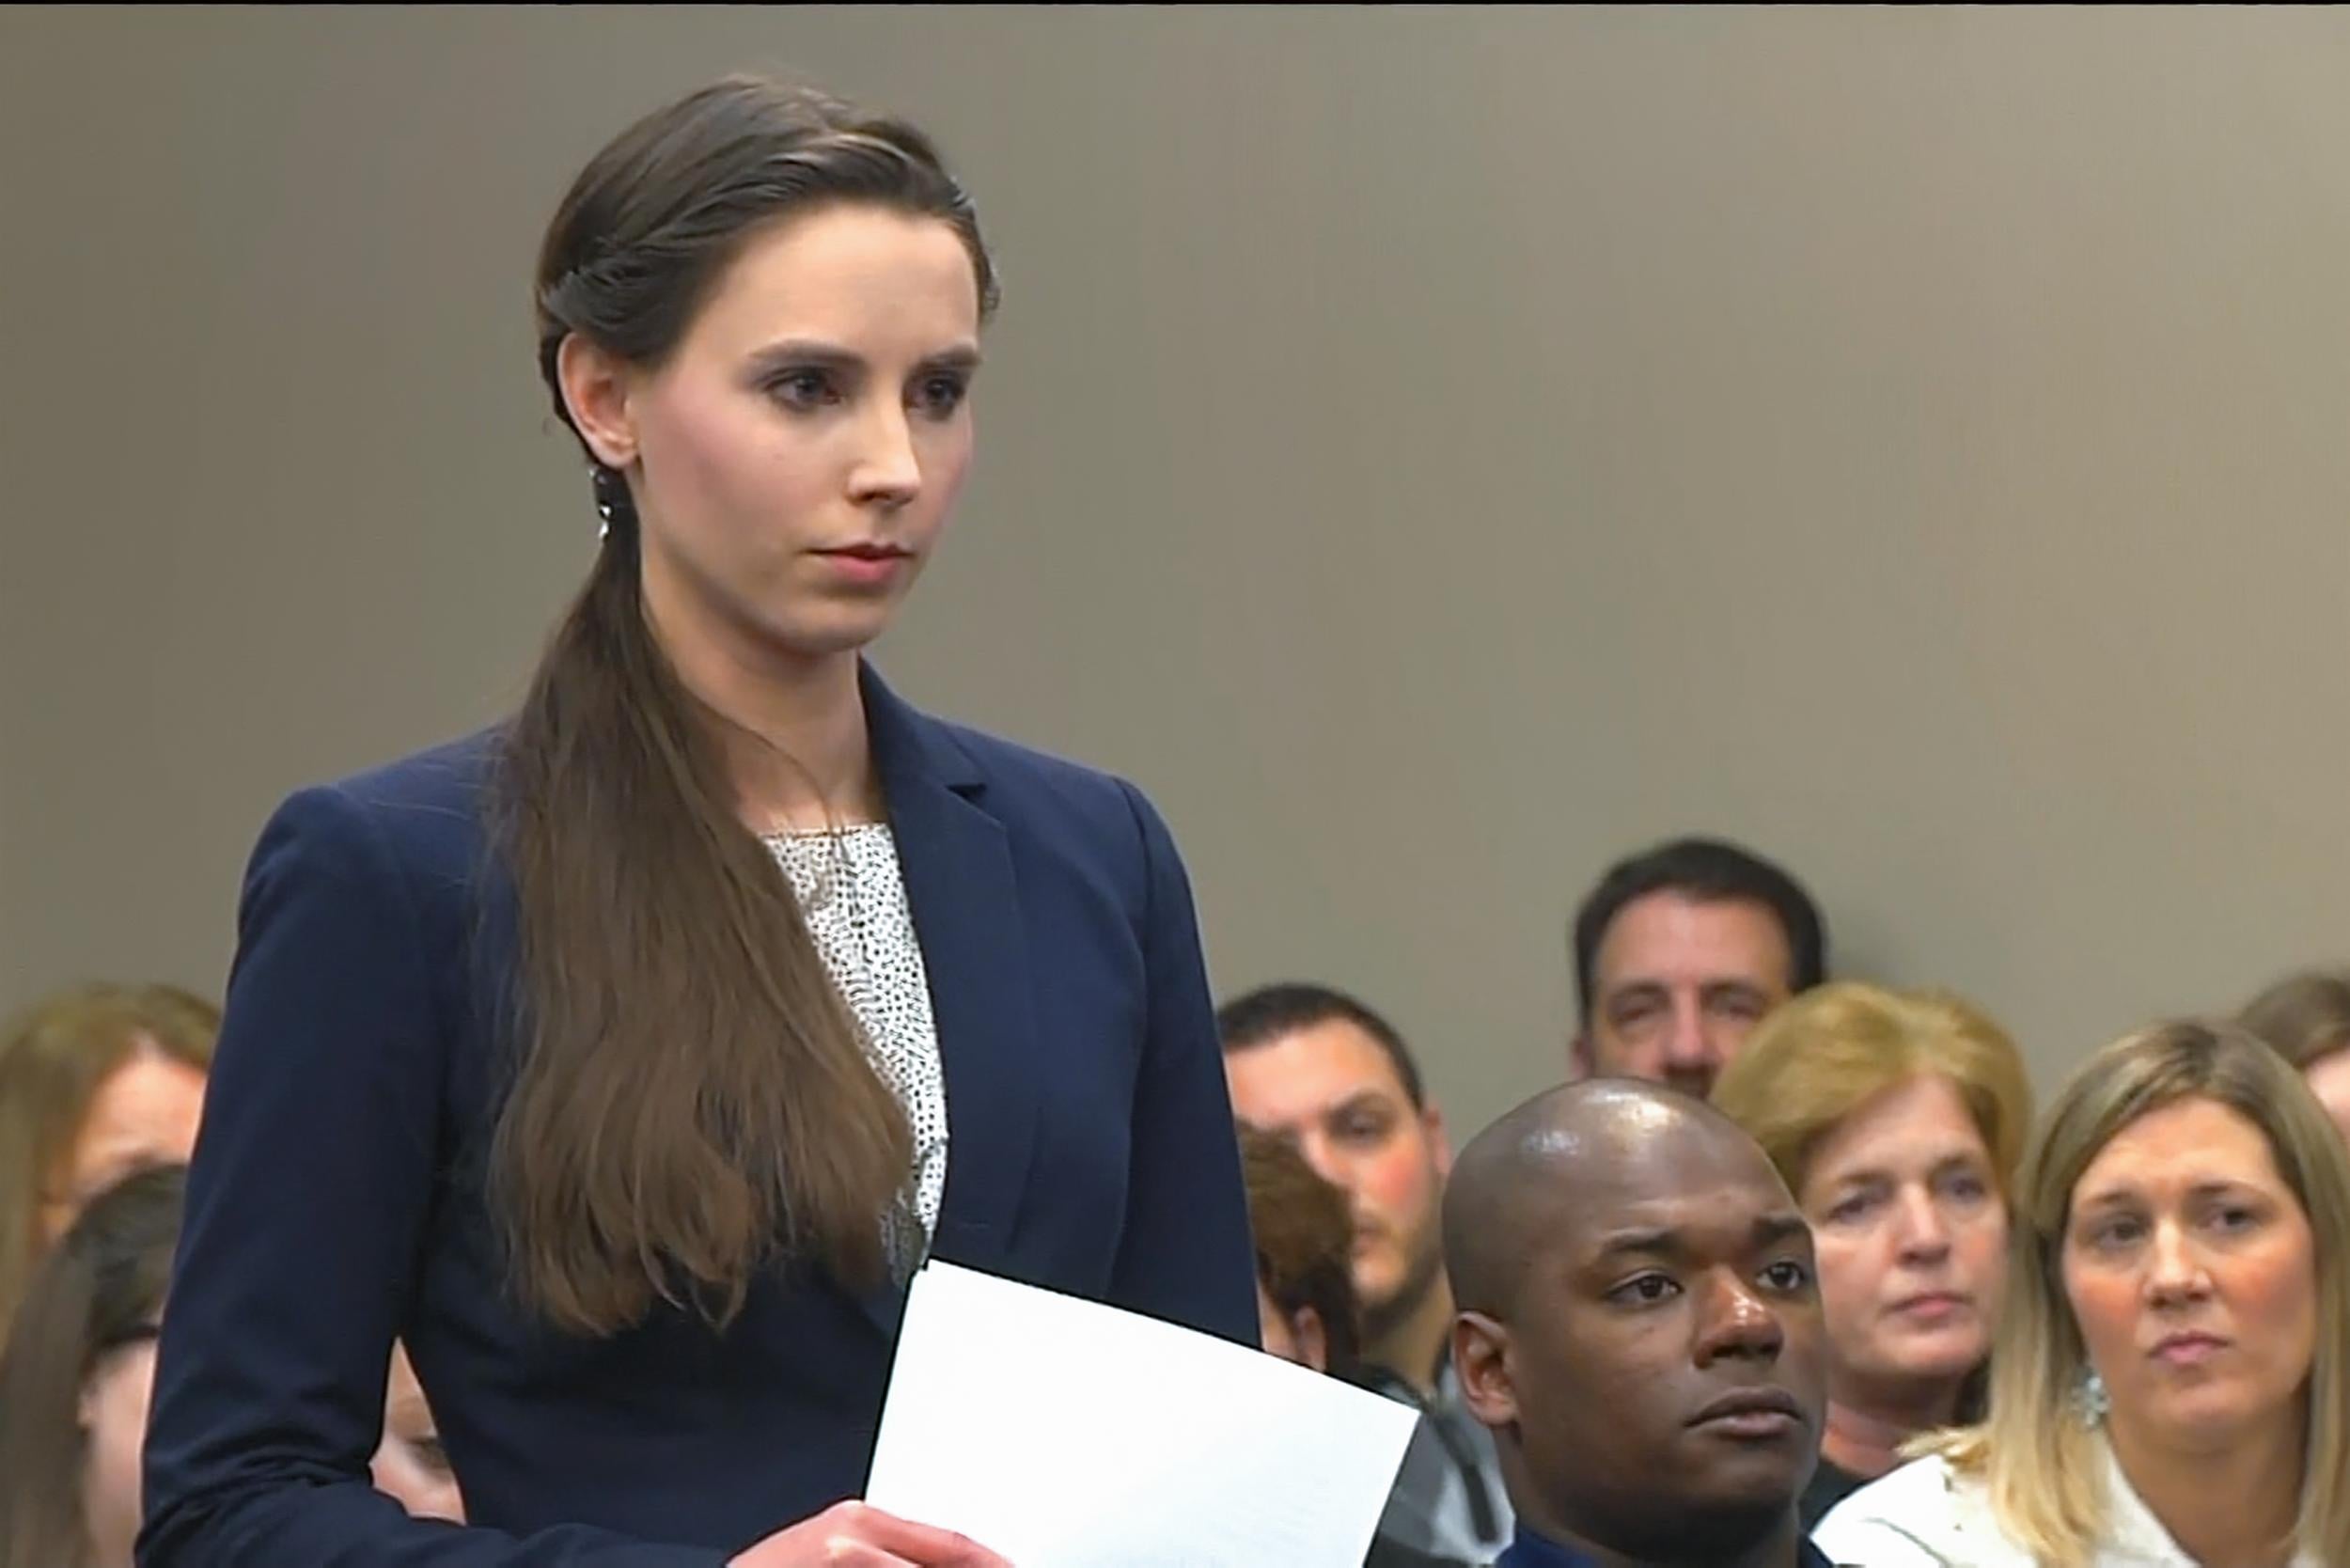 Rachael Denhollander delivers her impact statement in court directly to Larry Nassar